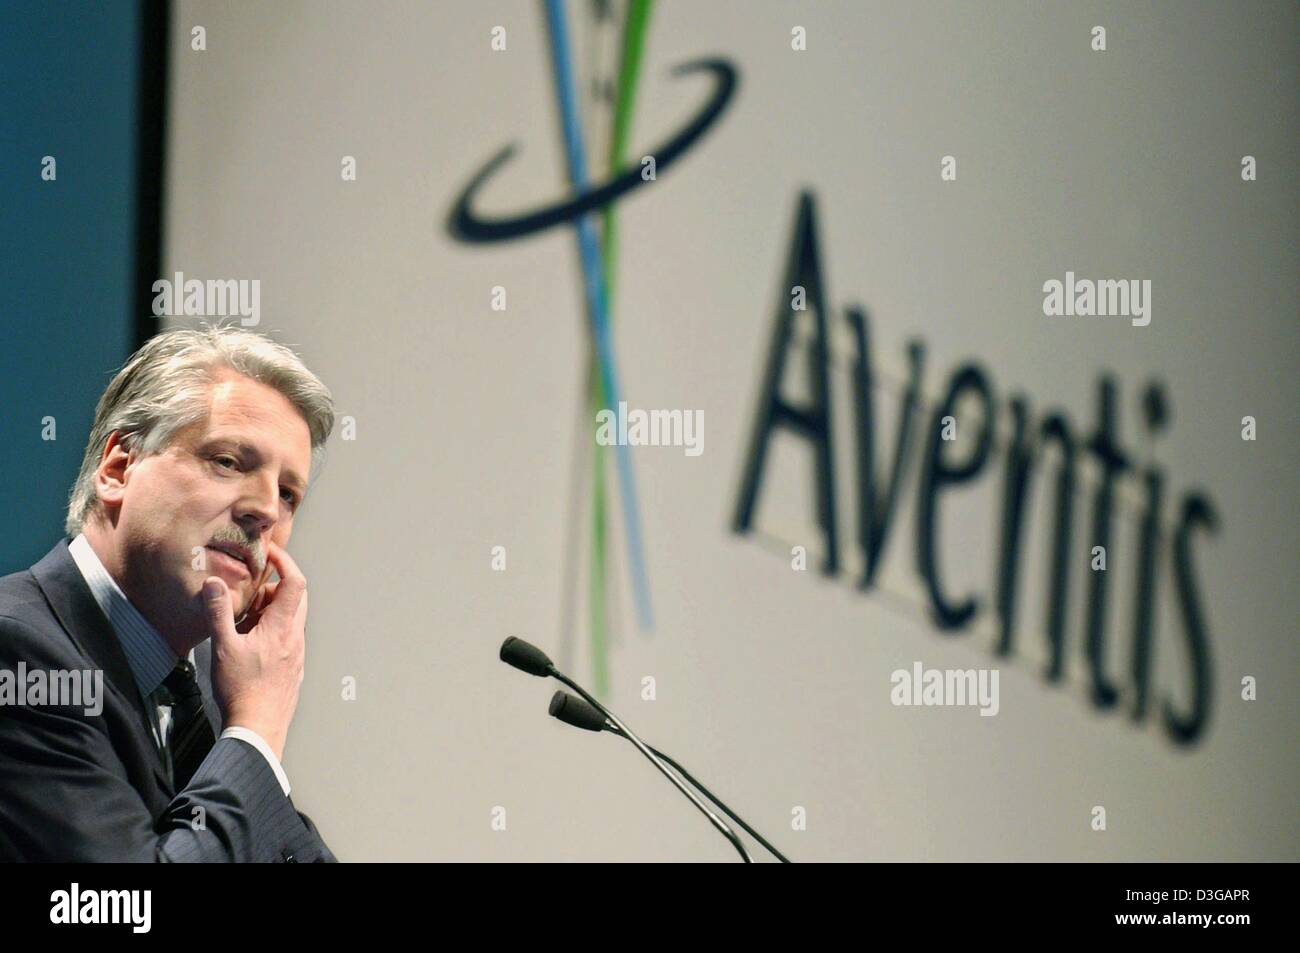 (dpa) Heinz-Werner Meier, CEO of Aventis Germany, speaks in front of company's employees at the Jahrhunderhalle in Frankfurt on Friday, 30 April 2004. After month-long long quarrels Aventis accepted the hostile takeover of French rival Sanofi. Aventis employees are fearing now the loss of their jobs. Stock Photo